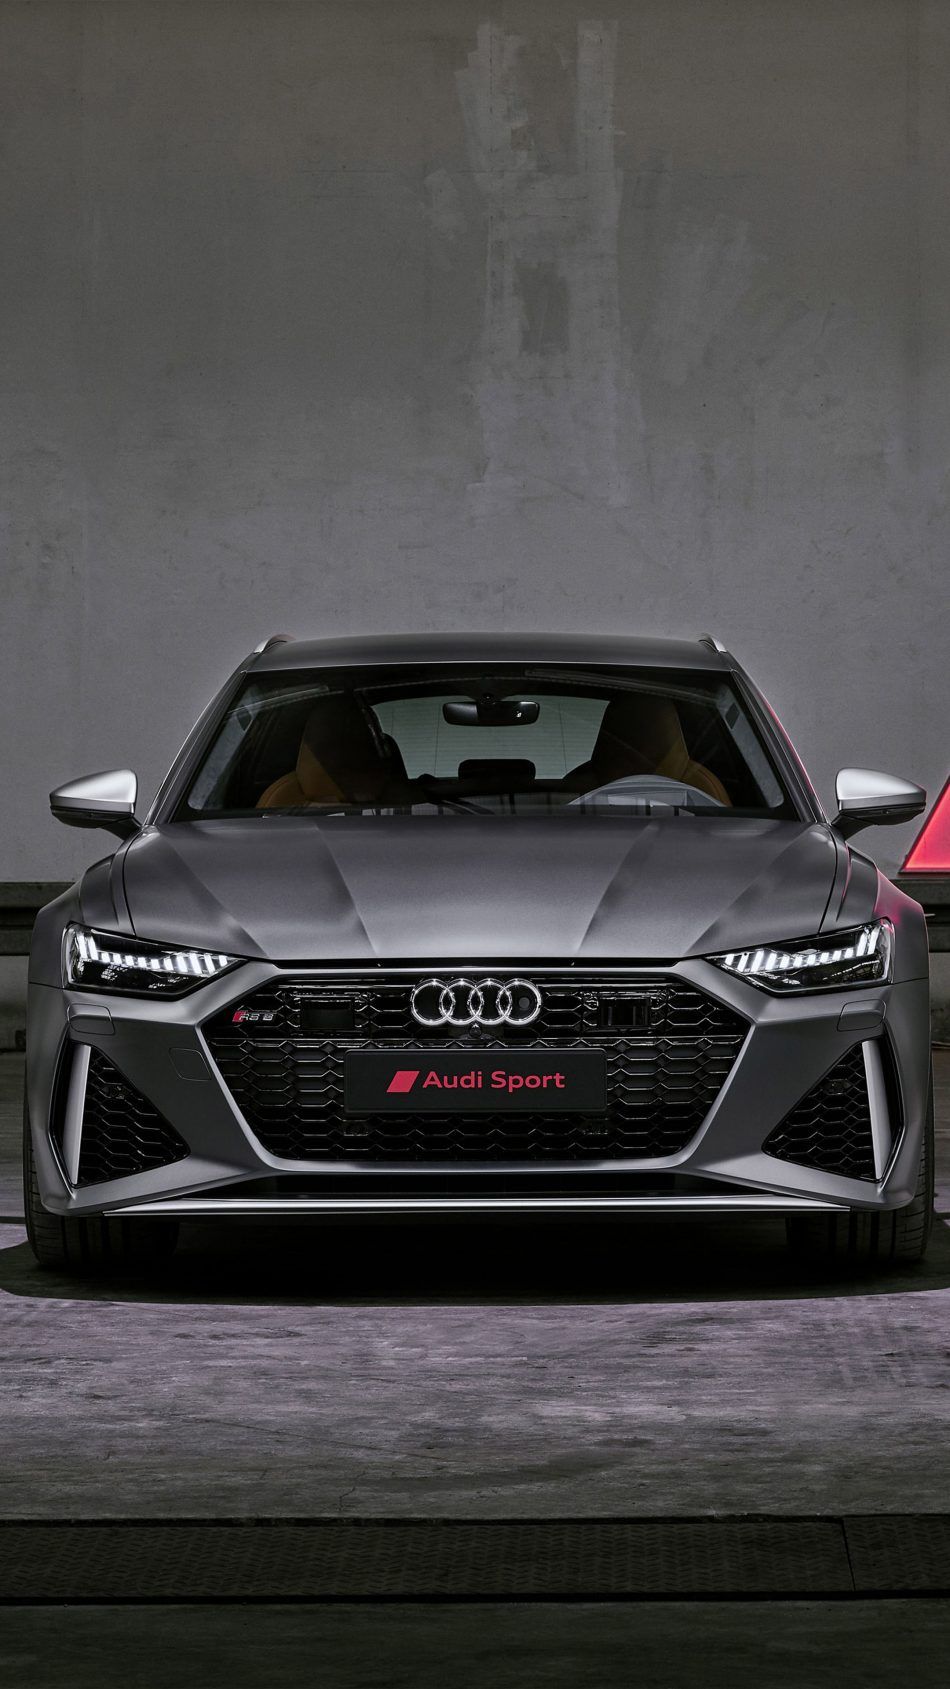 Free download Audi Rs6 Avant 2020 4k Ultra HD Mobile Wallpaper New Audi Rs6 [950x1689] for your Desktop, Mobile & Tablet. Explore 2020 New Mobile HD Wallpaper New